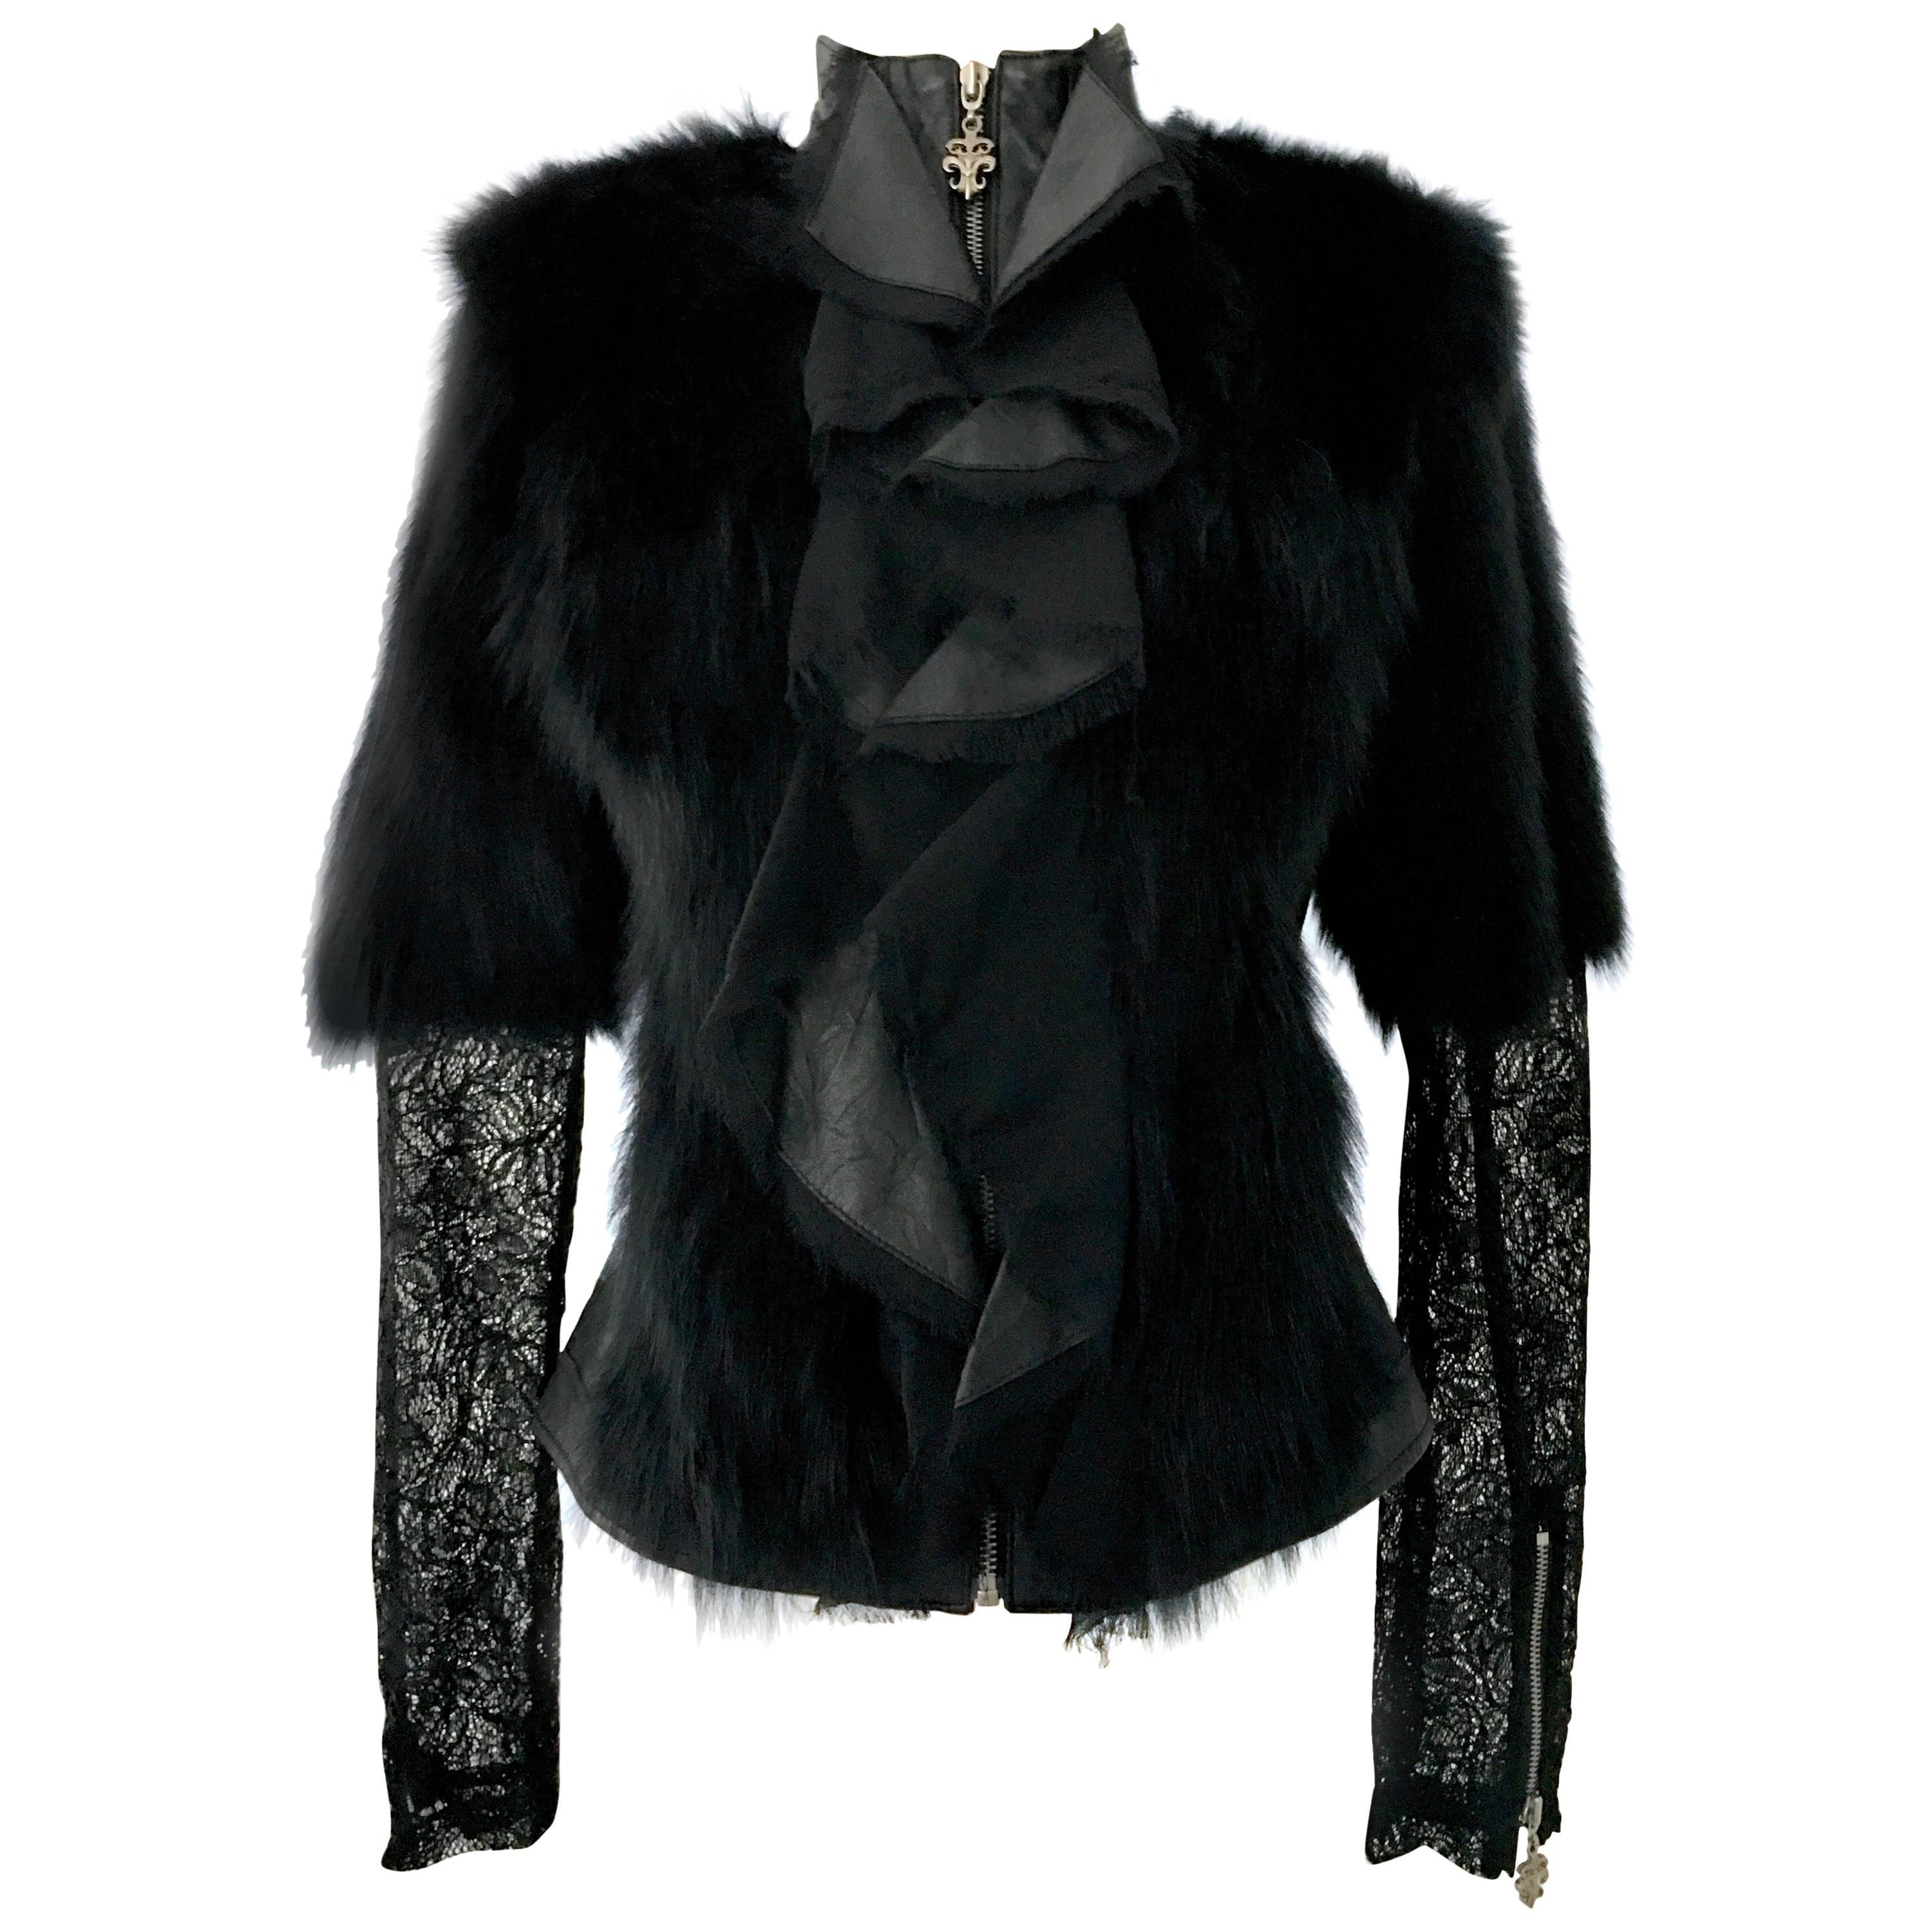 21st Century & New Coveted Black Leather, Authentic Fox Fur & Lace shirt/jacket by, Royal Underground - Nikki Six & Kelley Gray. Features a fitted zipper front bodice in black soft leather with black fox fur trim and black lace panels and sleeves.